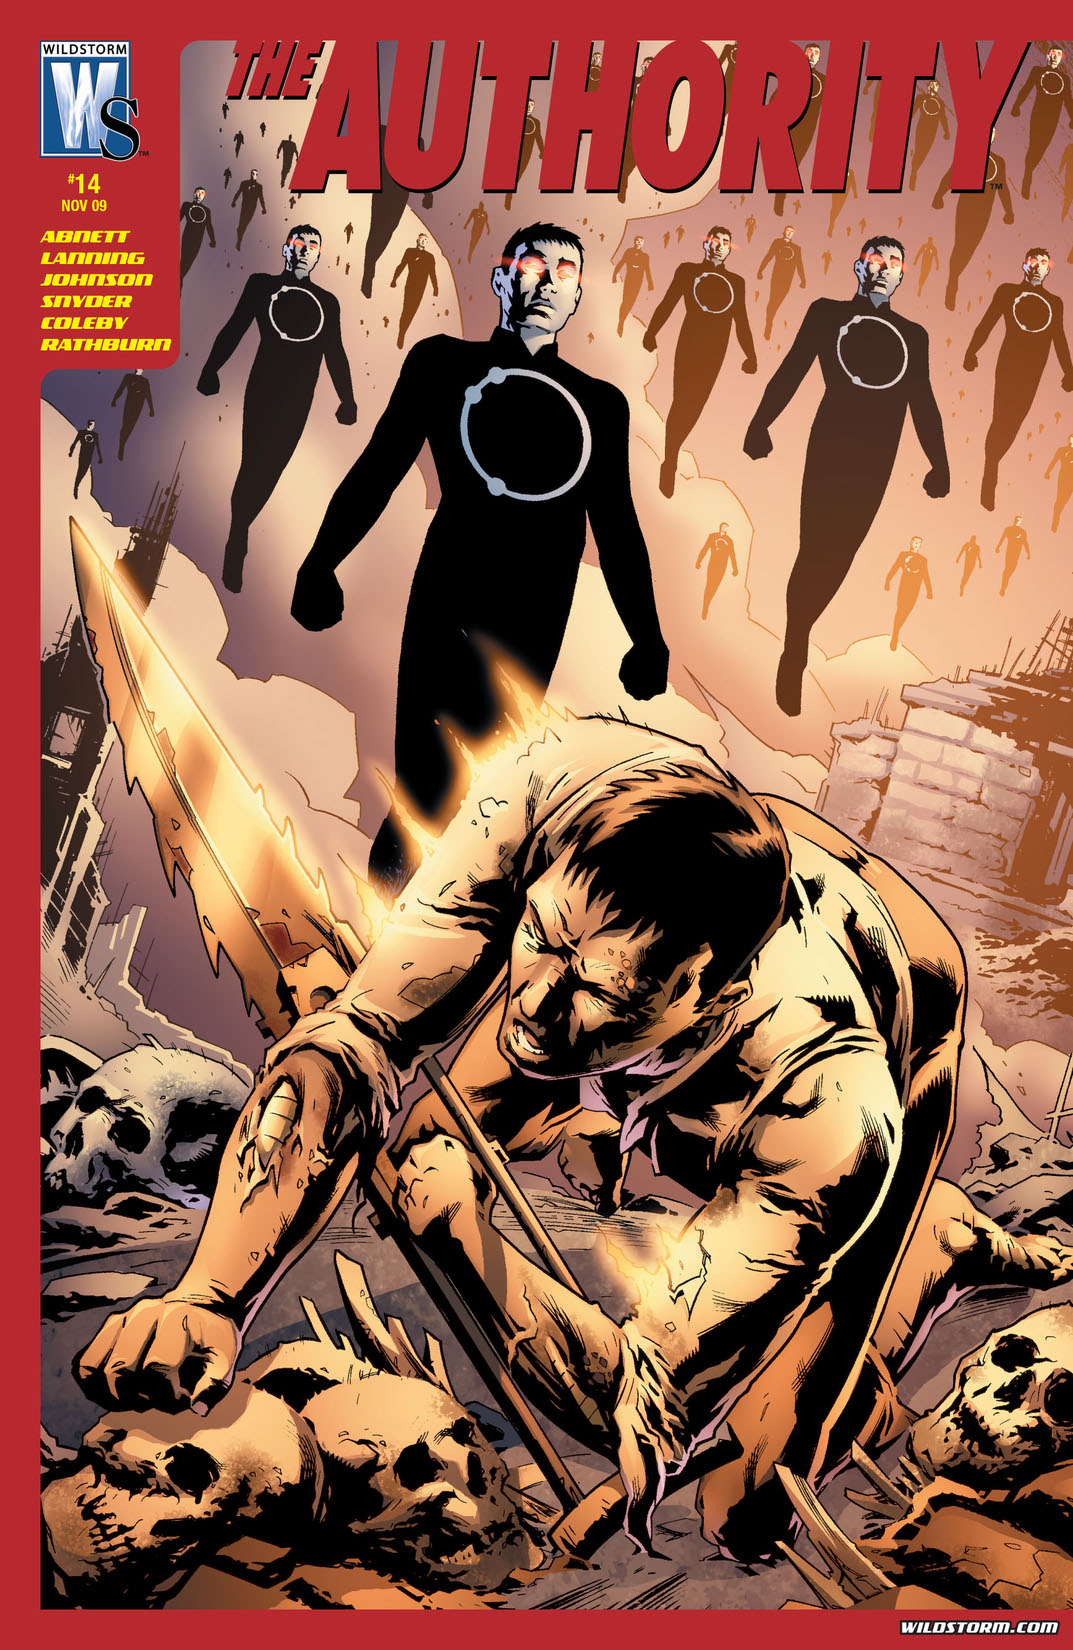 Authority (2008-) #14 preview images